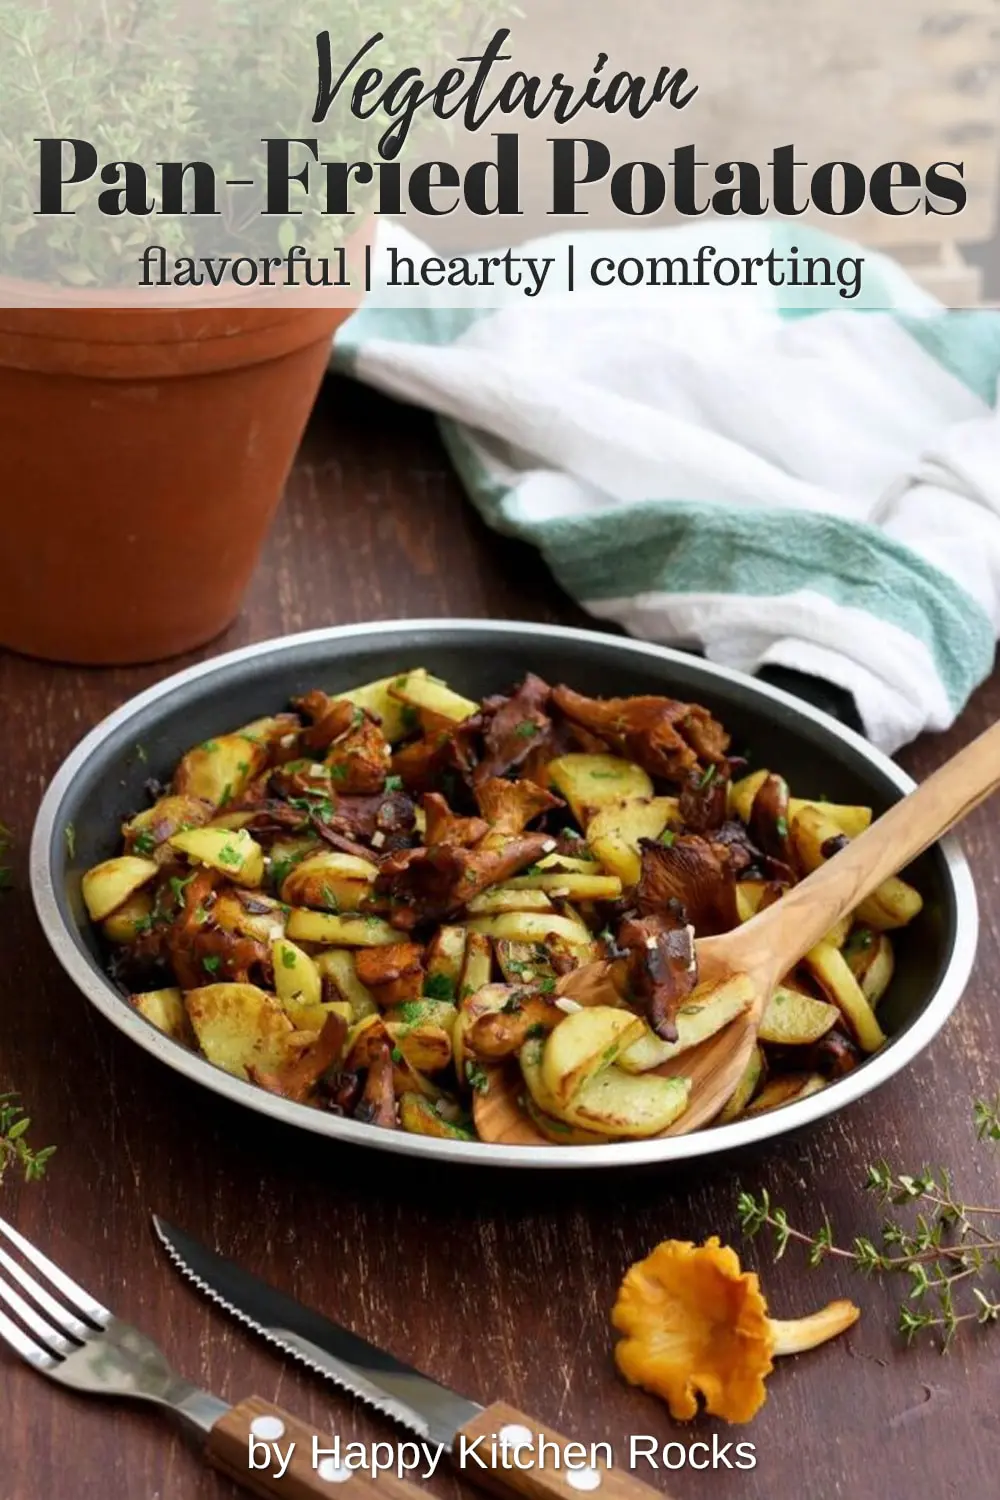 Russian Pan-Fried Potatoes with Wild Mushrooms Collage with Text Overlay